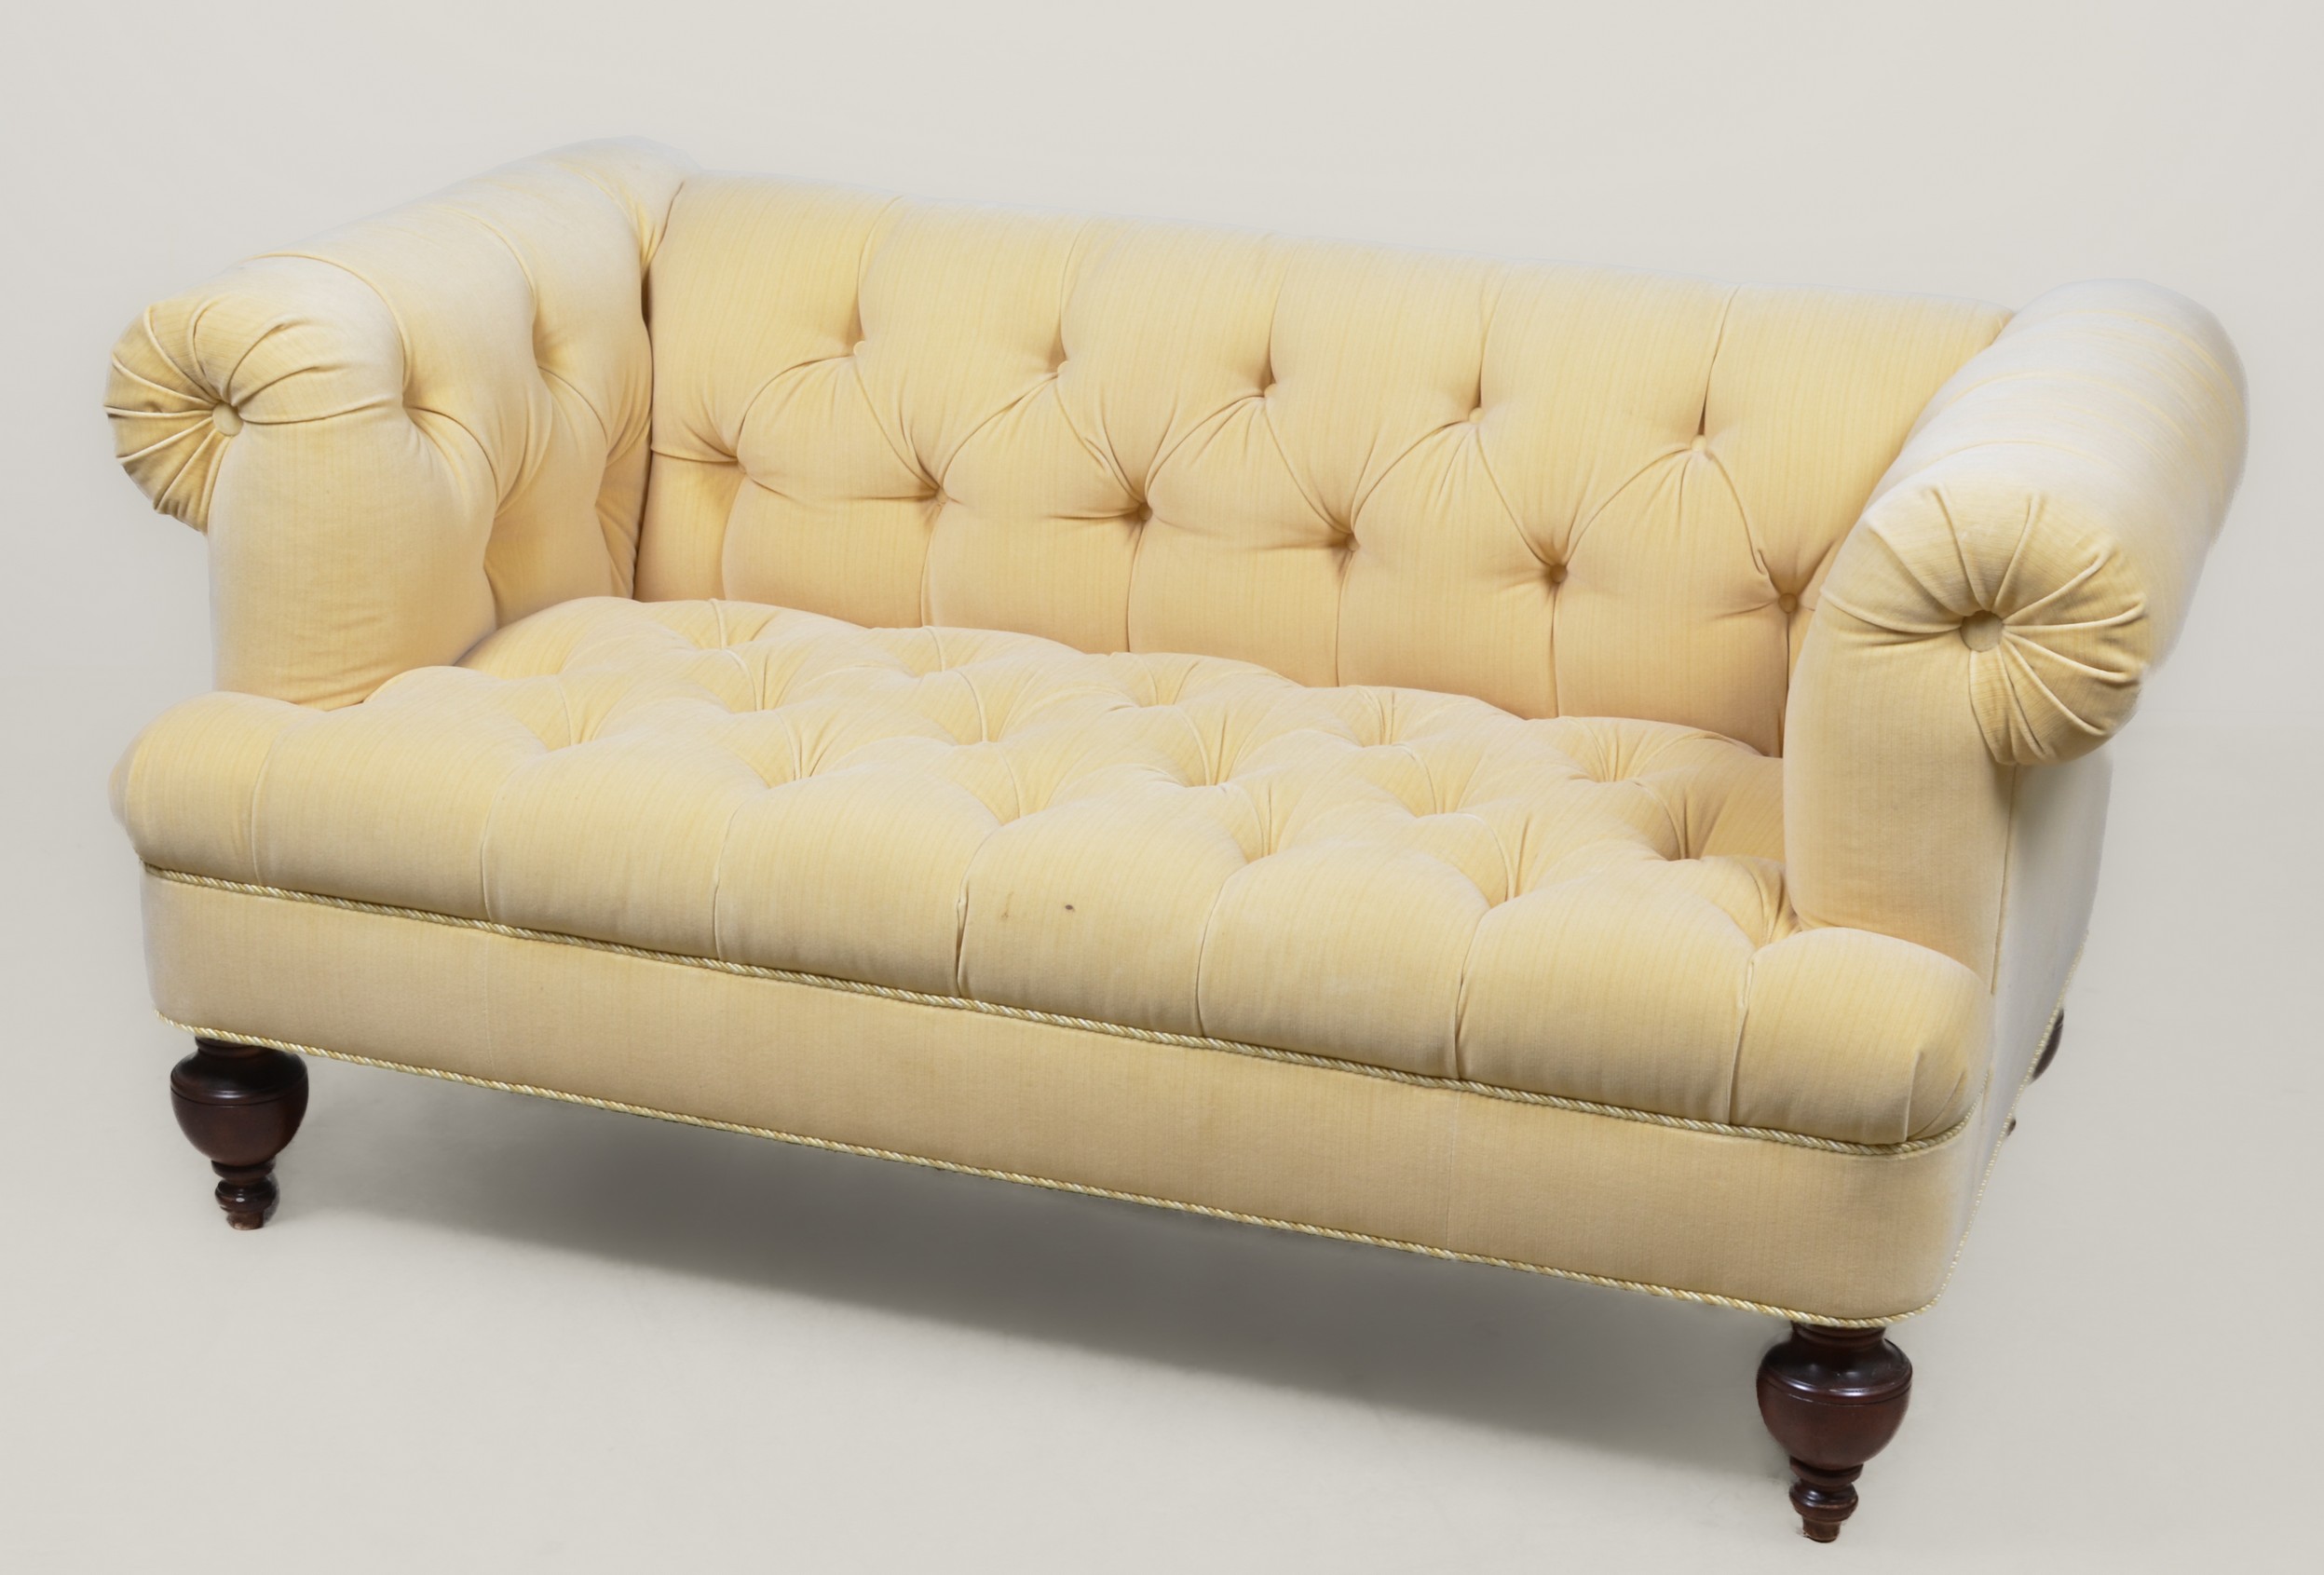 Upholstered tufted back and seat 3b5b39